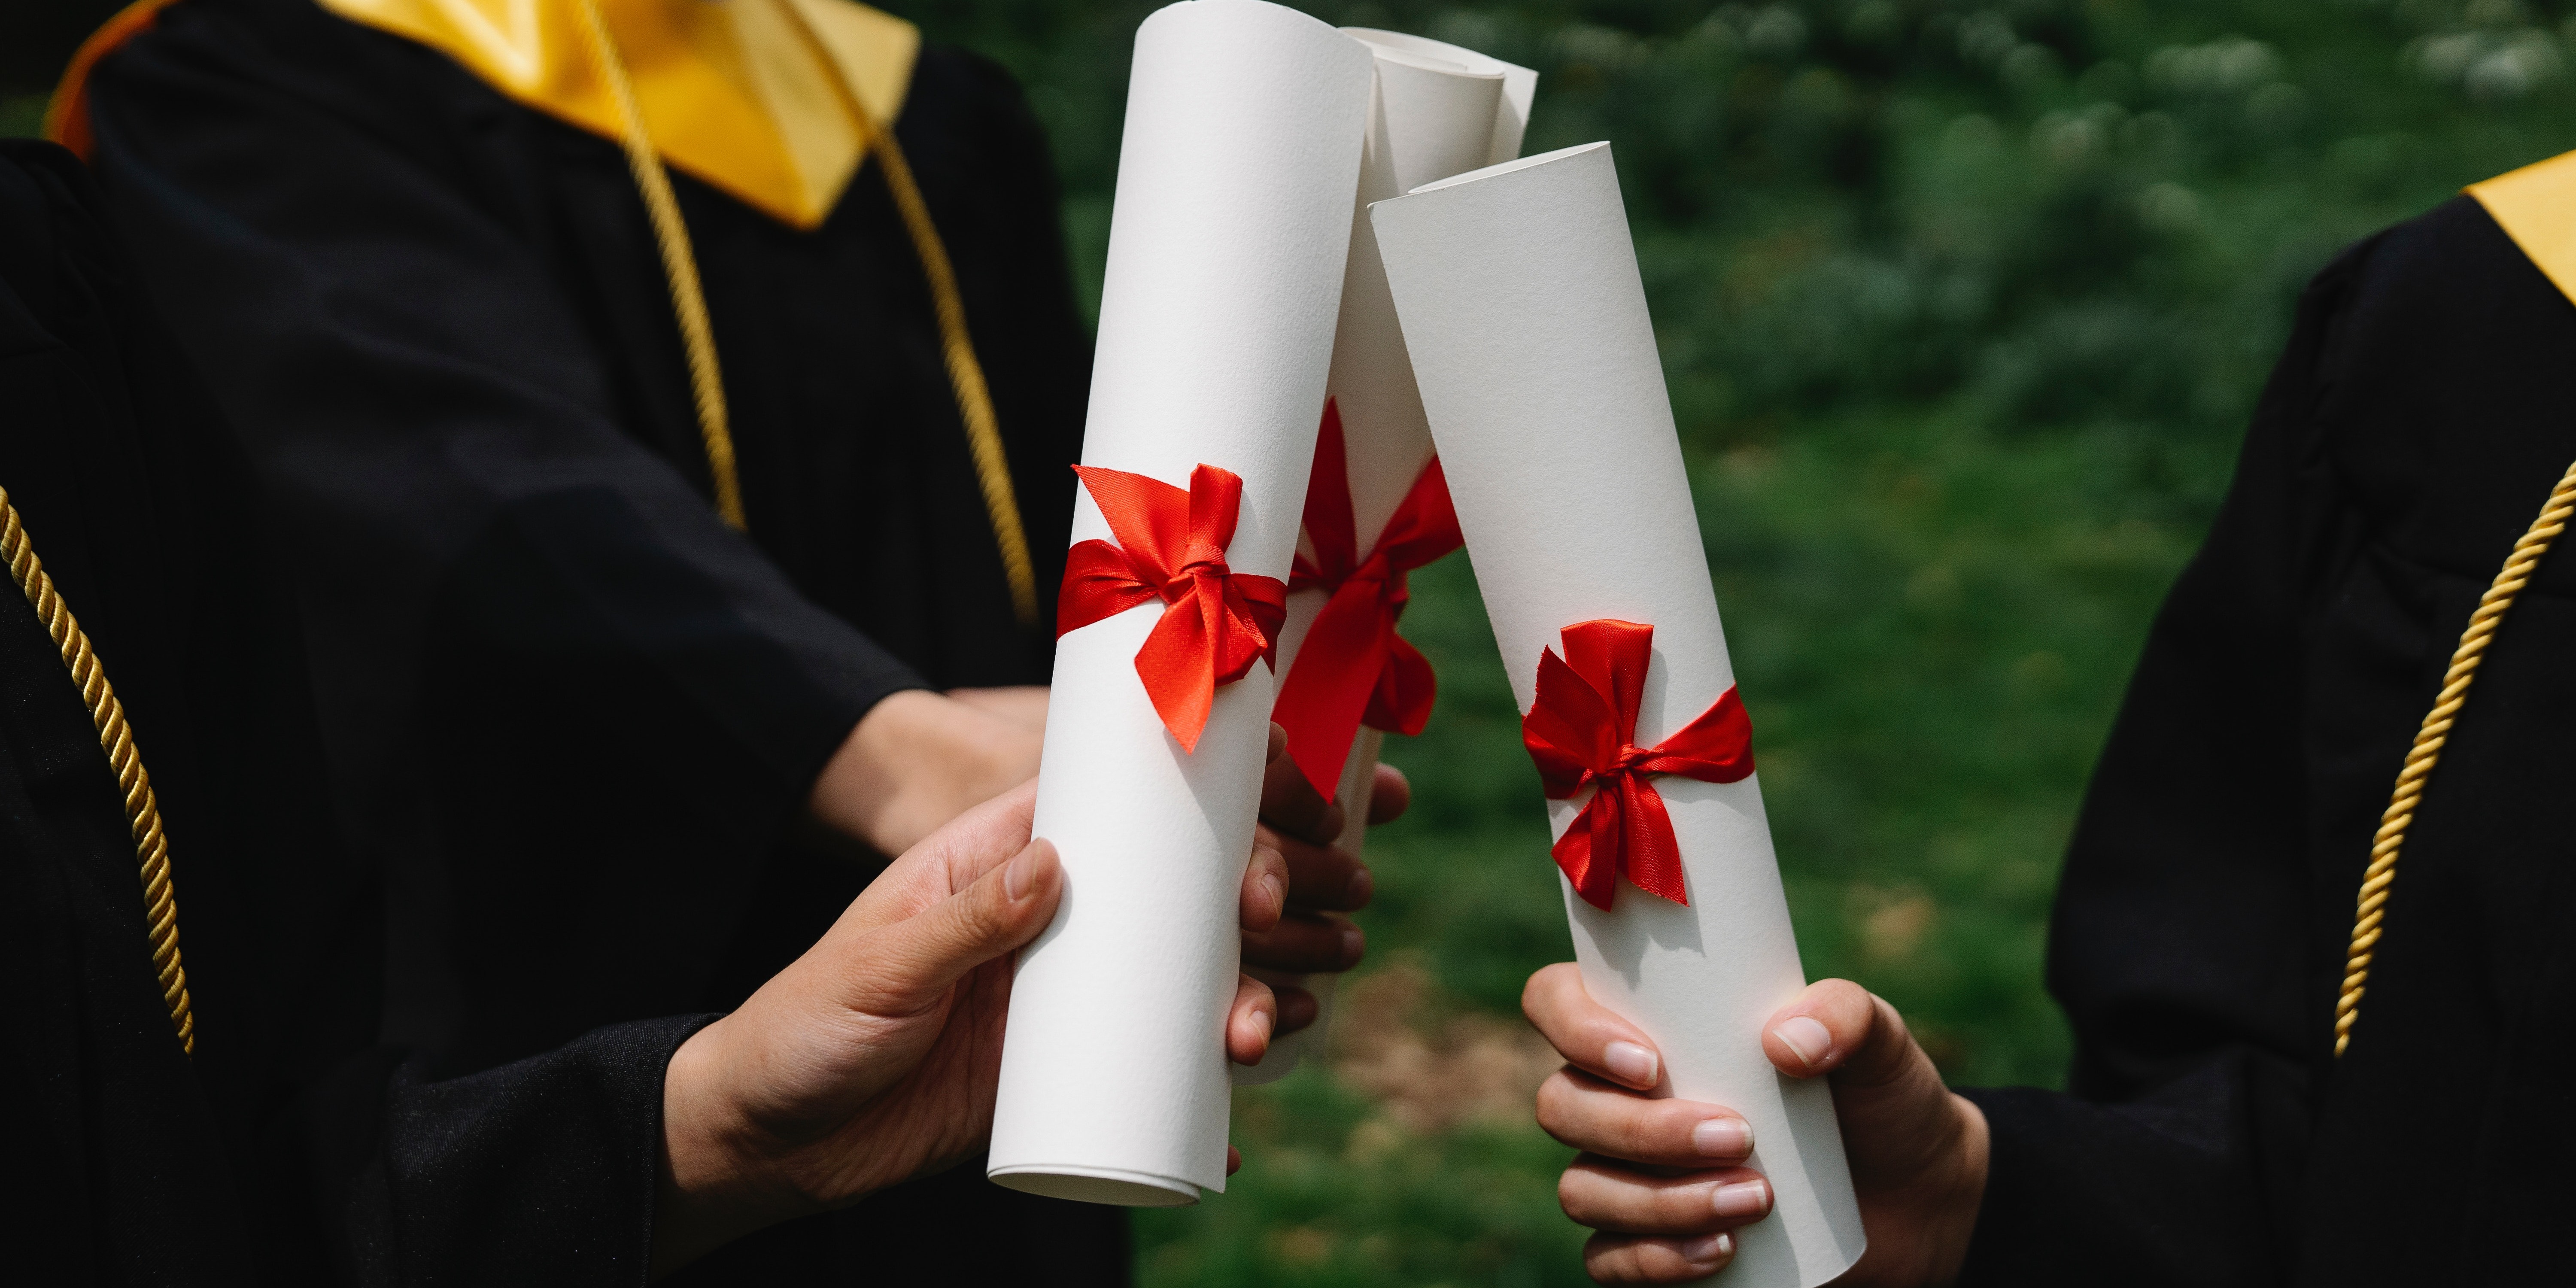 Photograph of People's Hands Holding White Diplomas